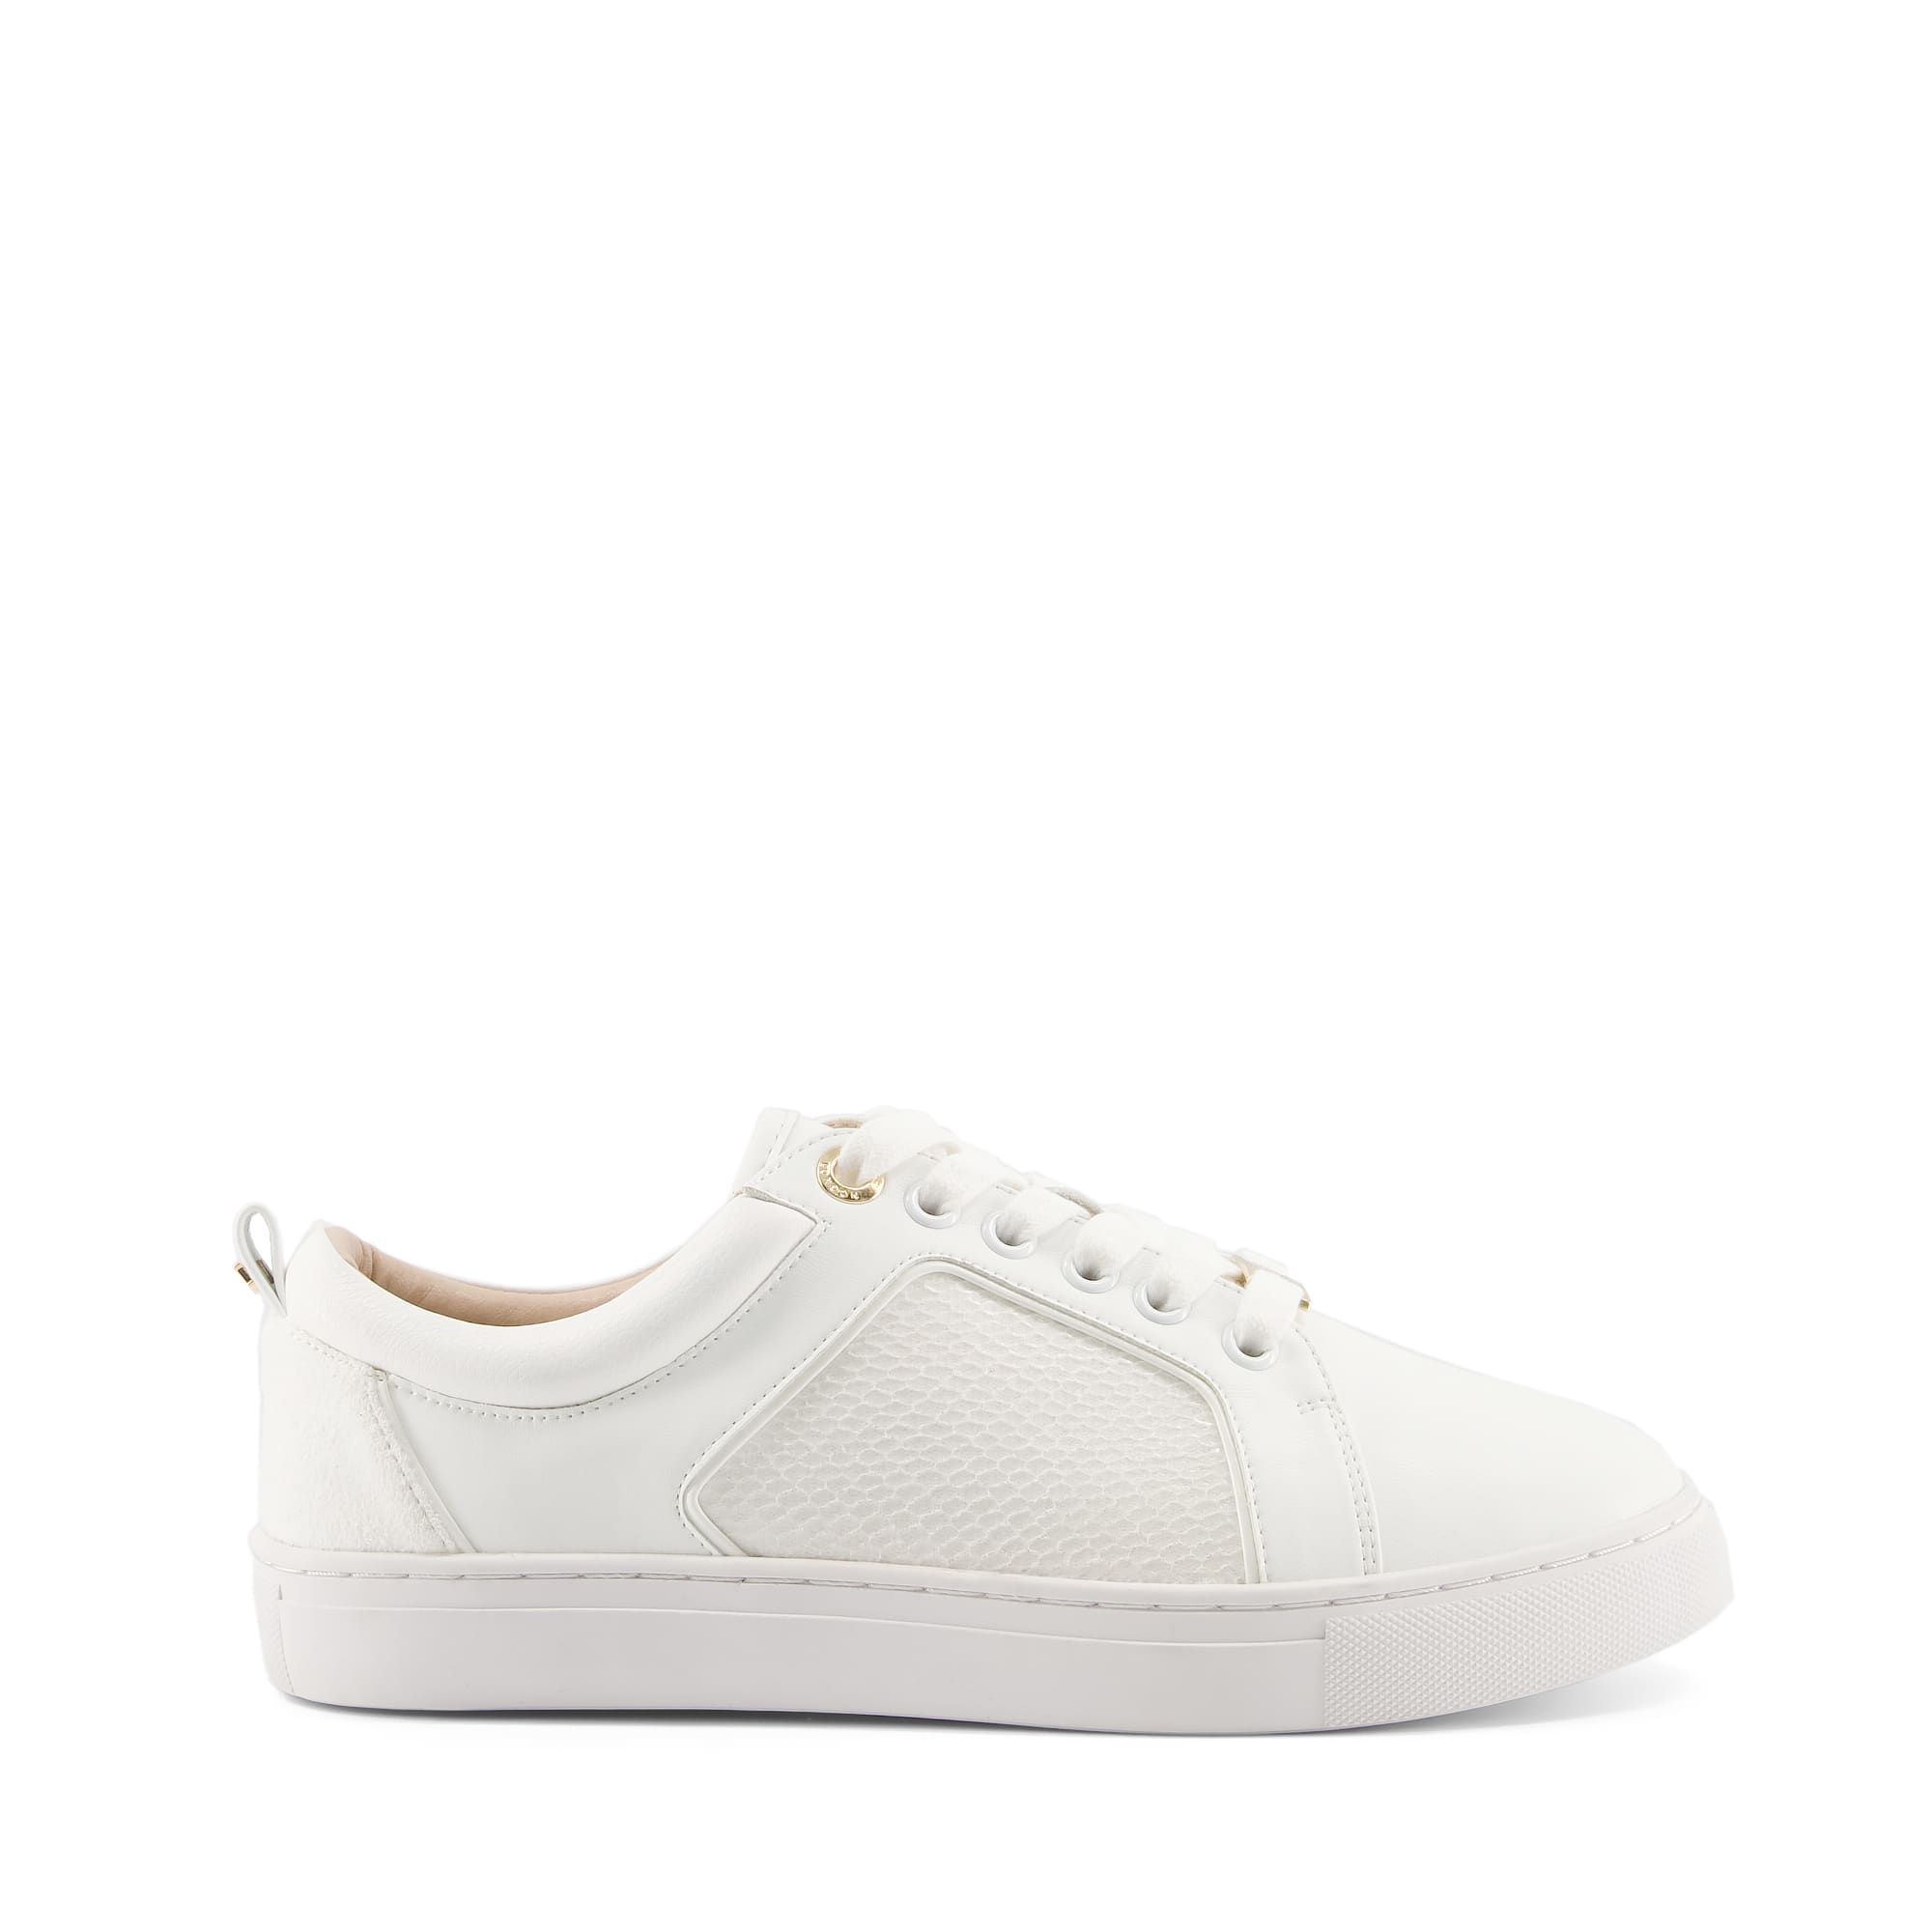 Featuring a chunky sole, comfortable round toe and lace-up fastening. These mix material trainers will add instant interest to you casual looks. The wide fit collection offers that extra space for your feet to breathe.